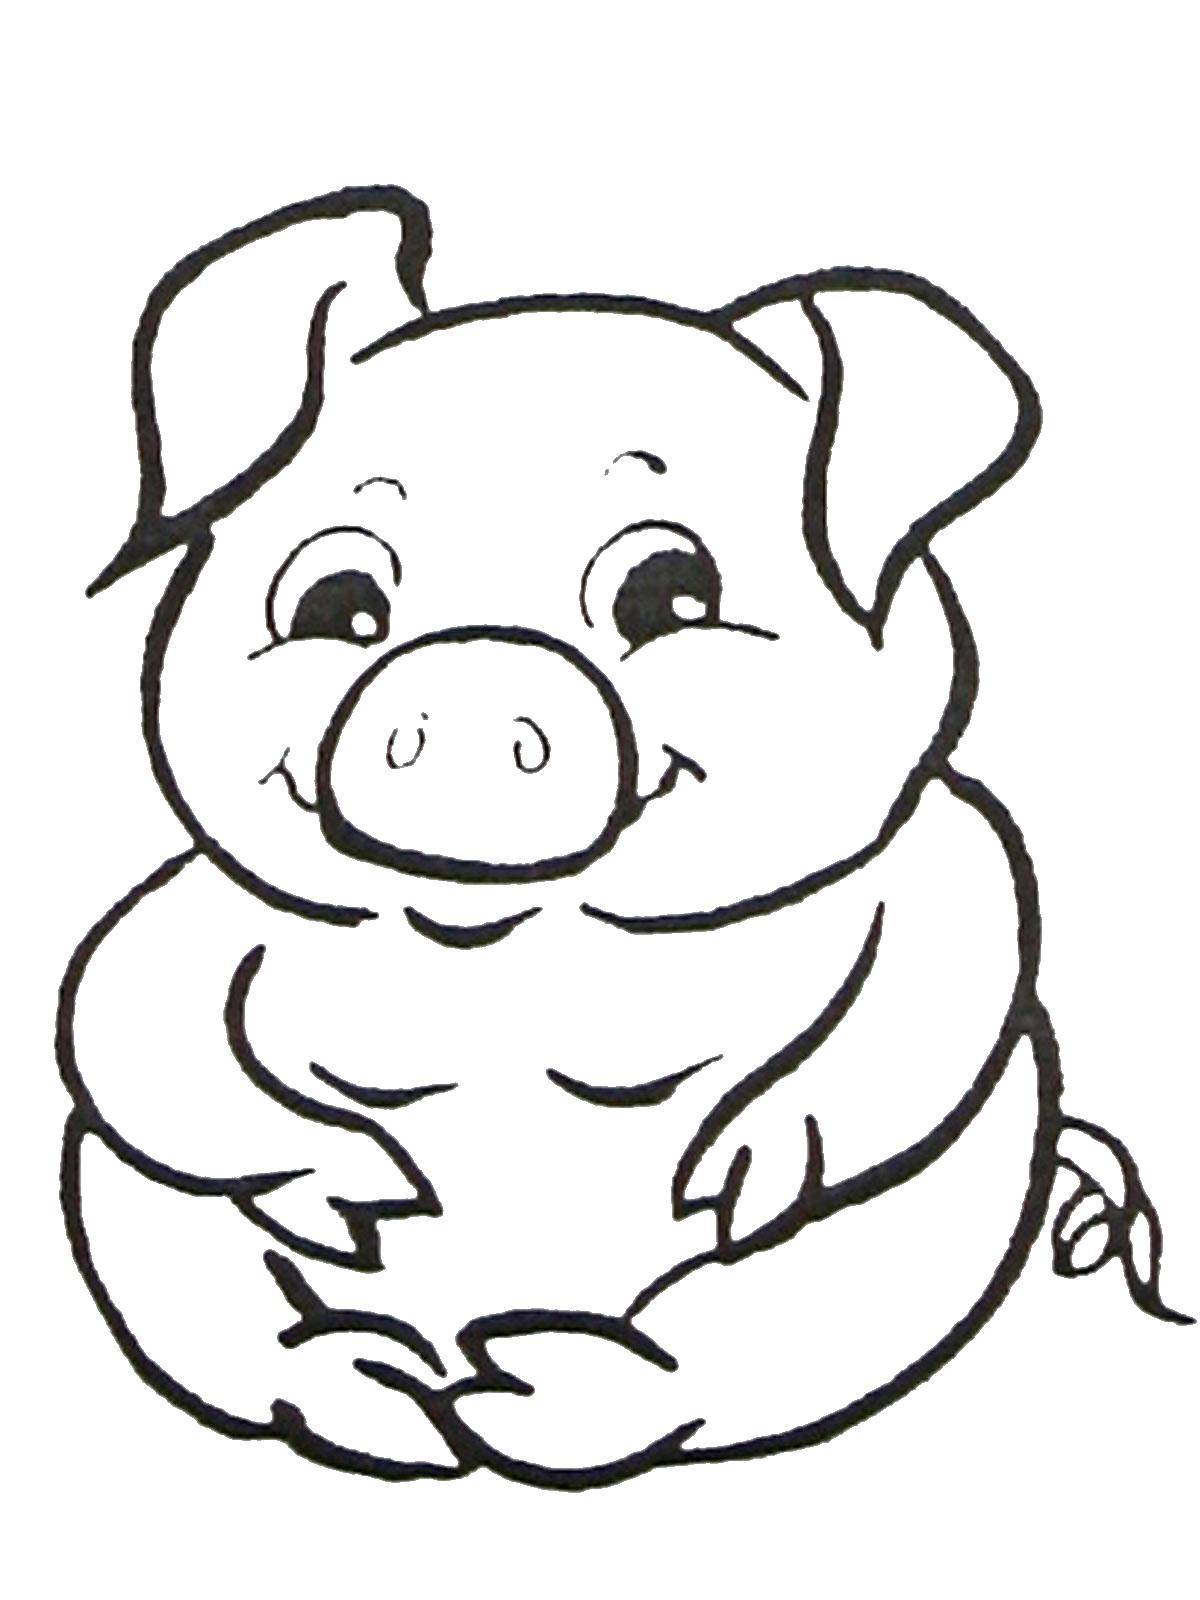 Coloring Fat pig. Category Pets allowed. Tags:  Animals, pig.